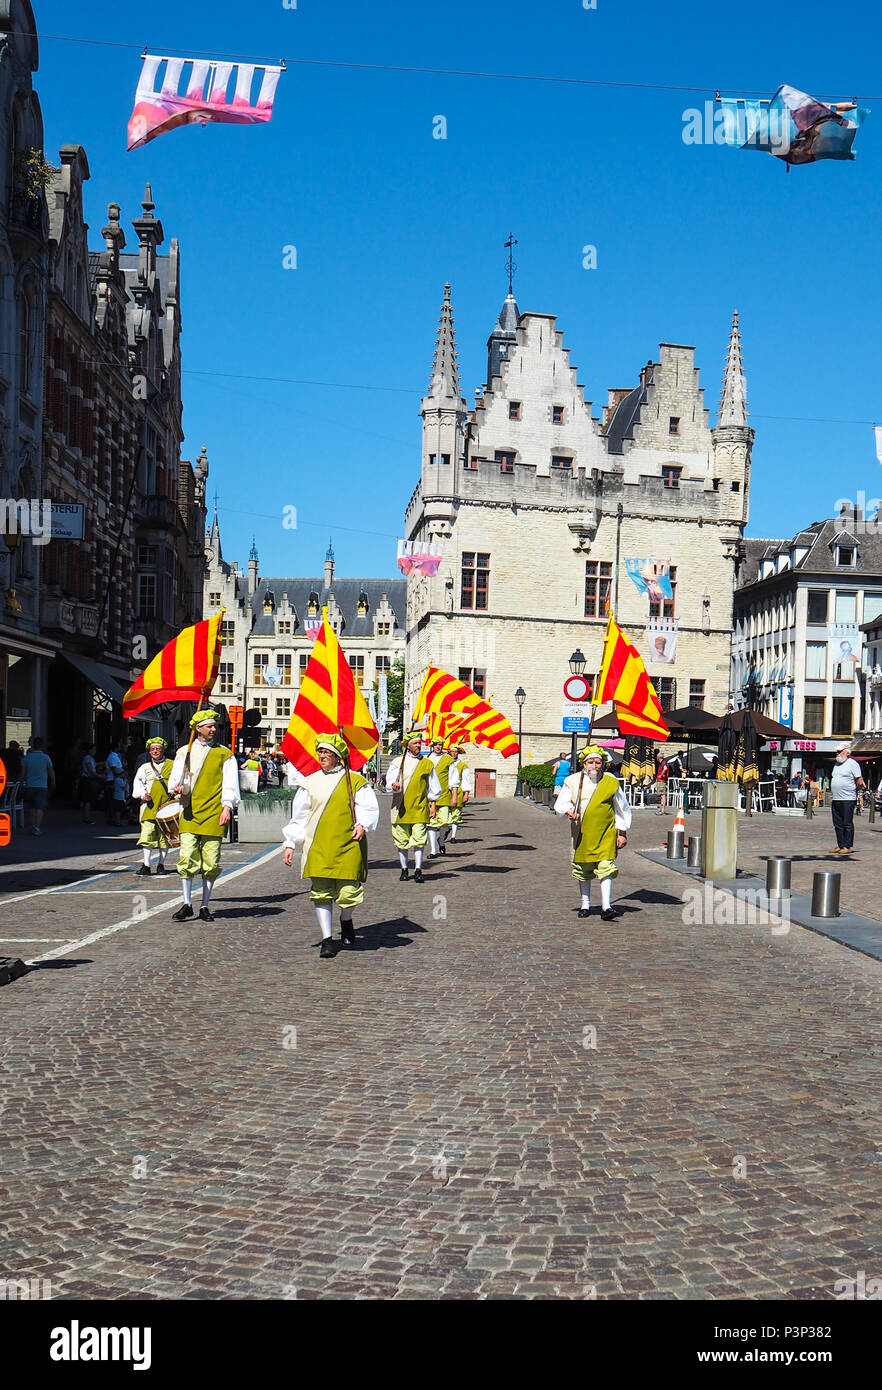 Mechelen, Belgium - May 2018: group of men carrying the red and yellow striped city flag of Mechelen during the Hanswijk procession on the Ijzerenleen Stock Photo